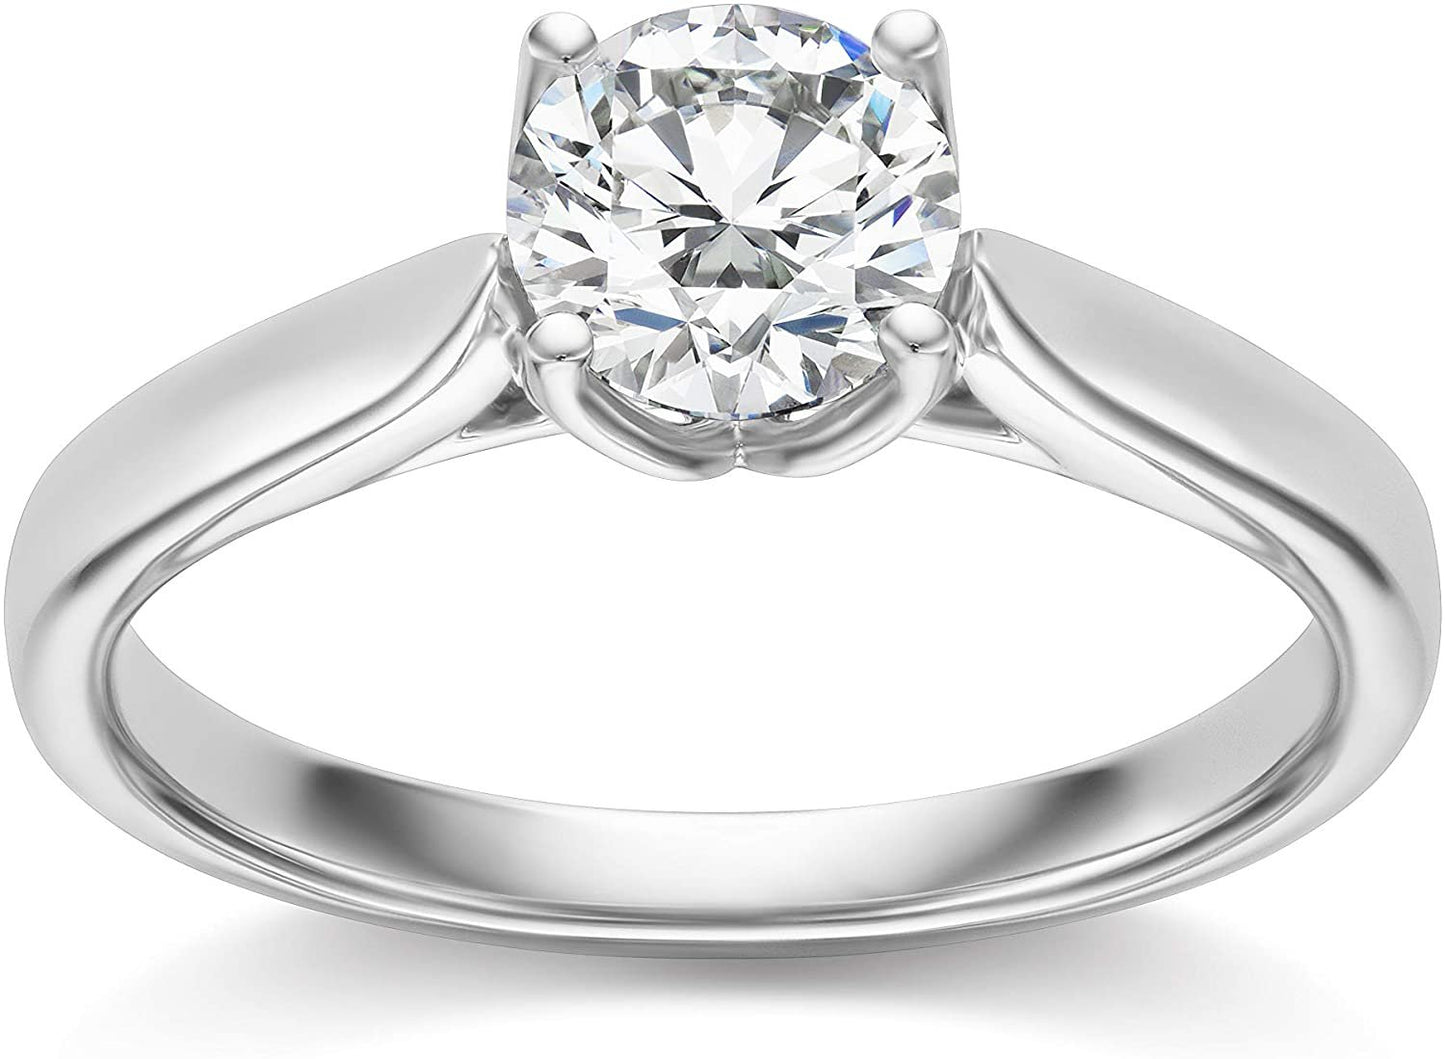 IGI Certified 1-1/2 Carat Round Brilliant-Cut Lab Created Diamond 14K Gold Classic 4-Prong Solitaire Engagement Ring (I-J Color, VS1-VS2 Clarity) - 14K White Gold, Size 8-1/4